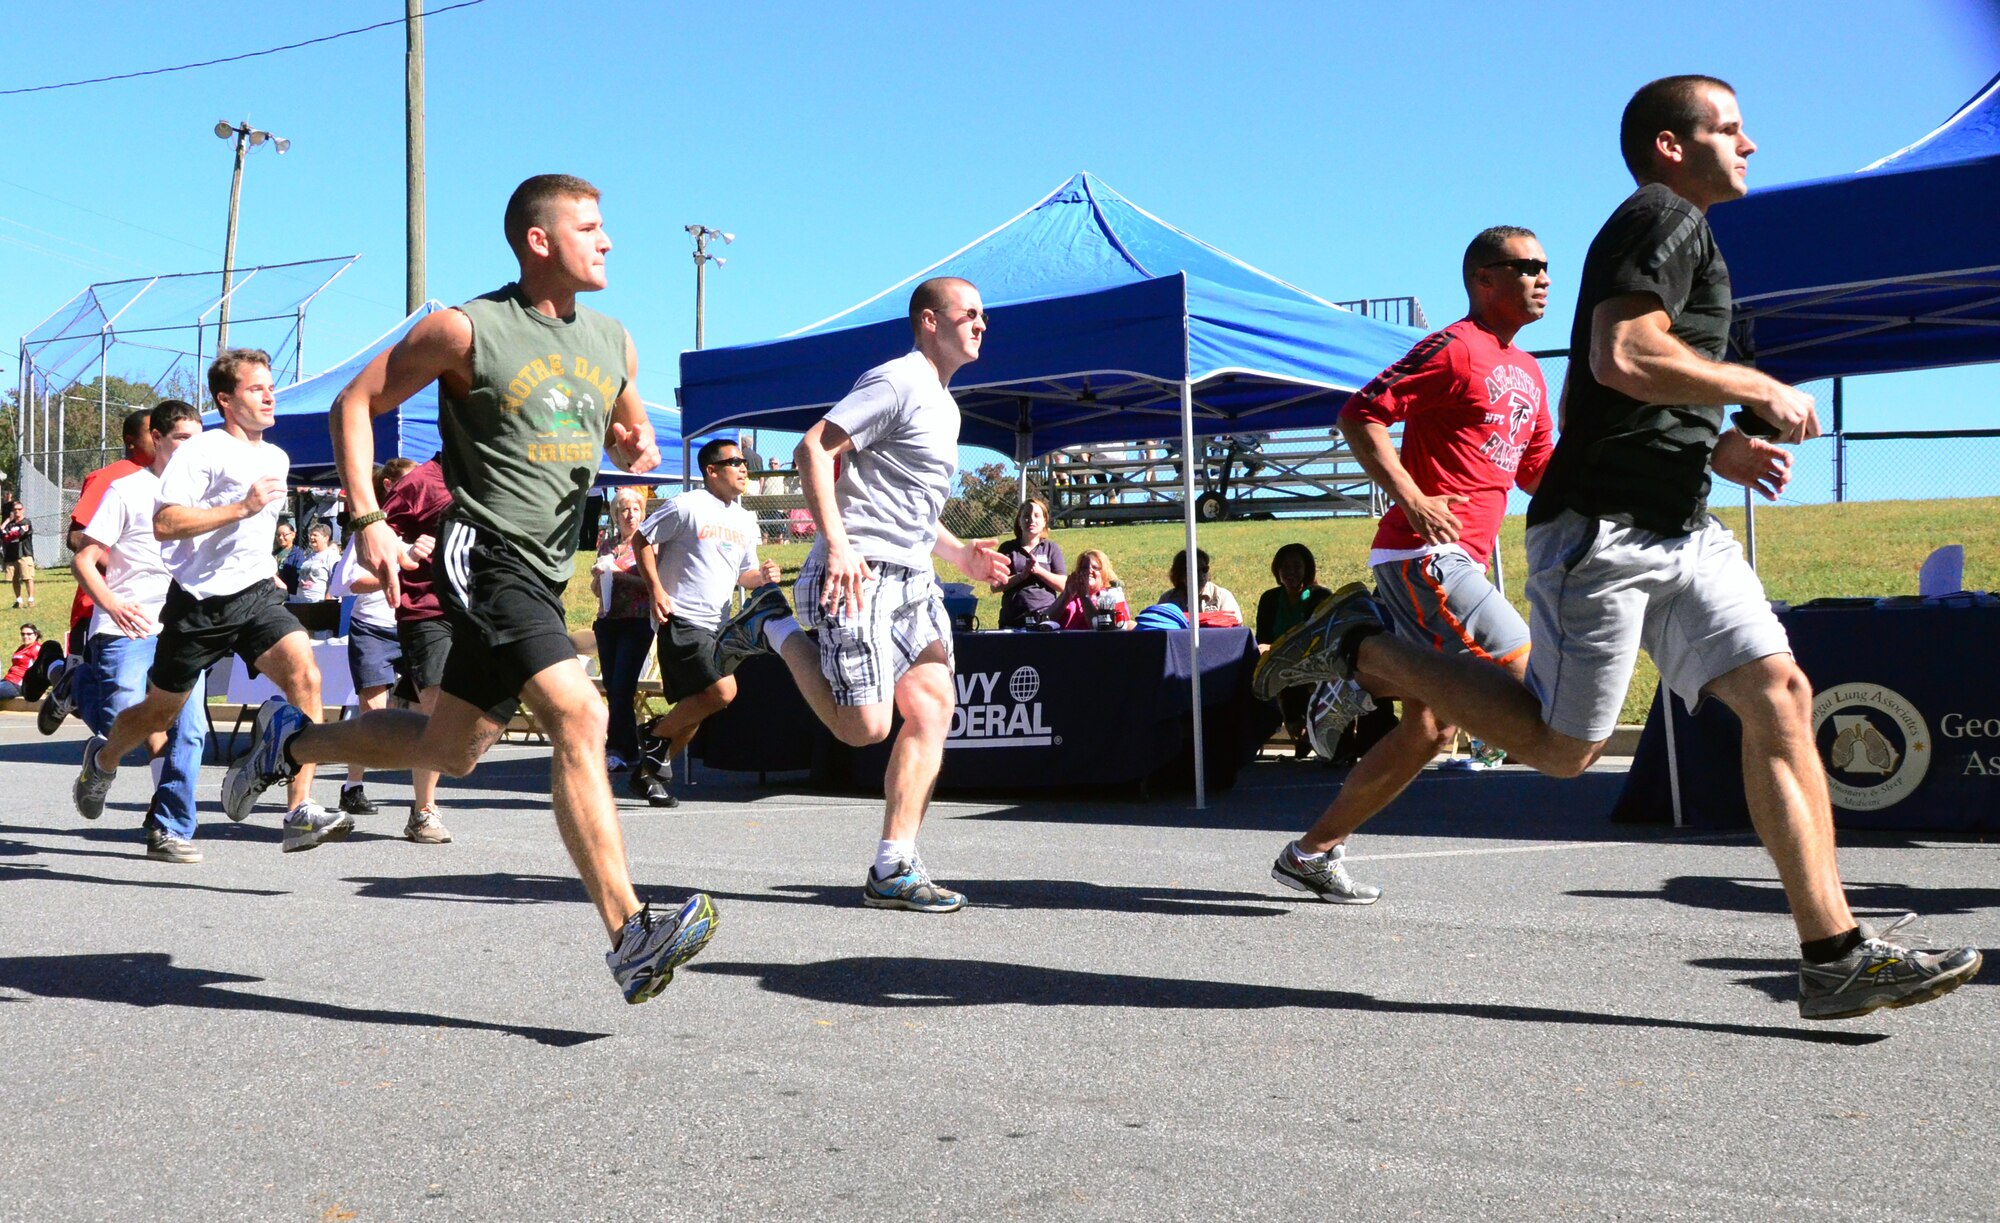 A fun run officially kicks off the Annual 94th Airlift Wing Team Day held at Dobbins Air Reserve Base, Ga., Oct. 16. Team day is designed to promote team work and competitive spirit between units. (U.S. Air Force photo/Senior Airman Elizabeth Van Patten)